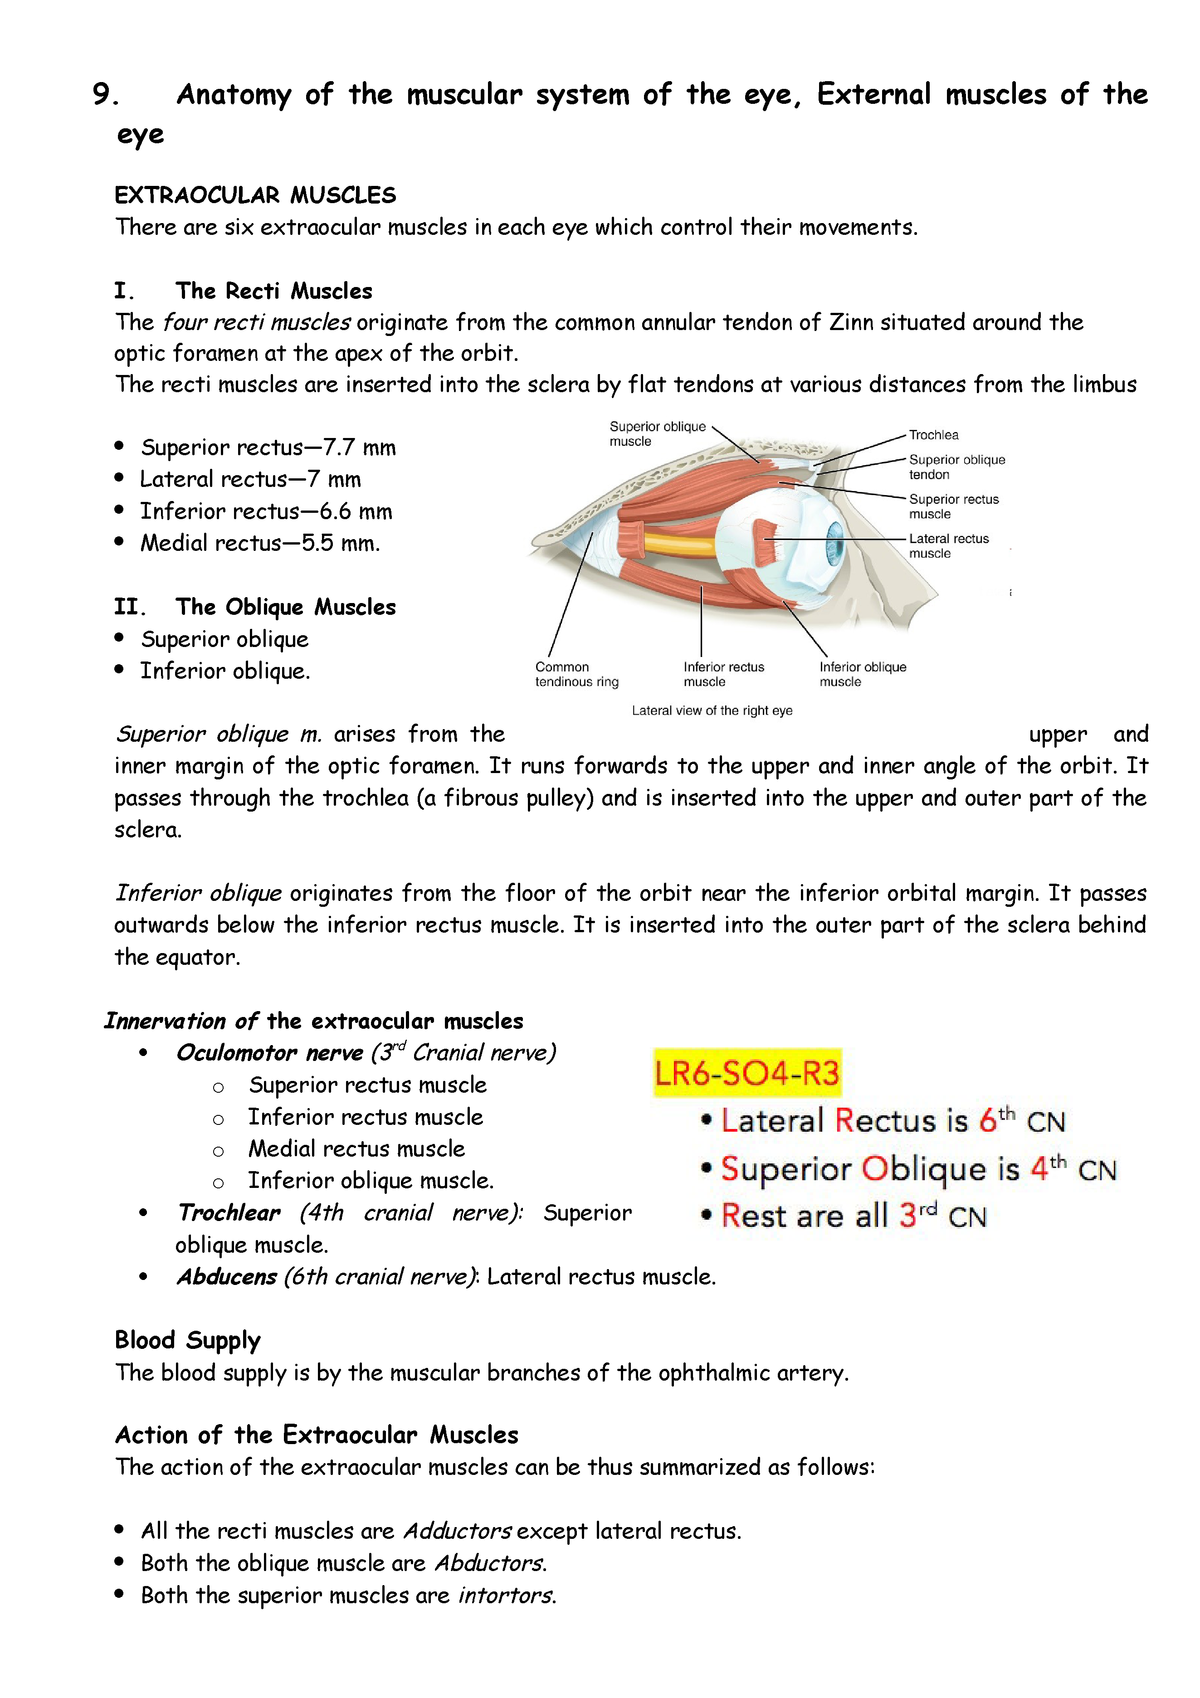 9.Anatomy of the muscular system of the eye - external muscles of the